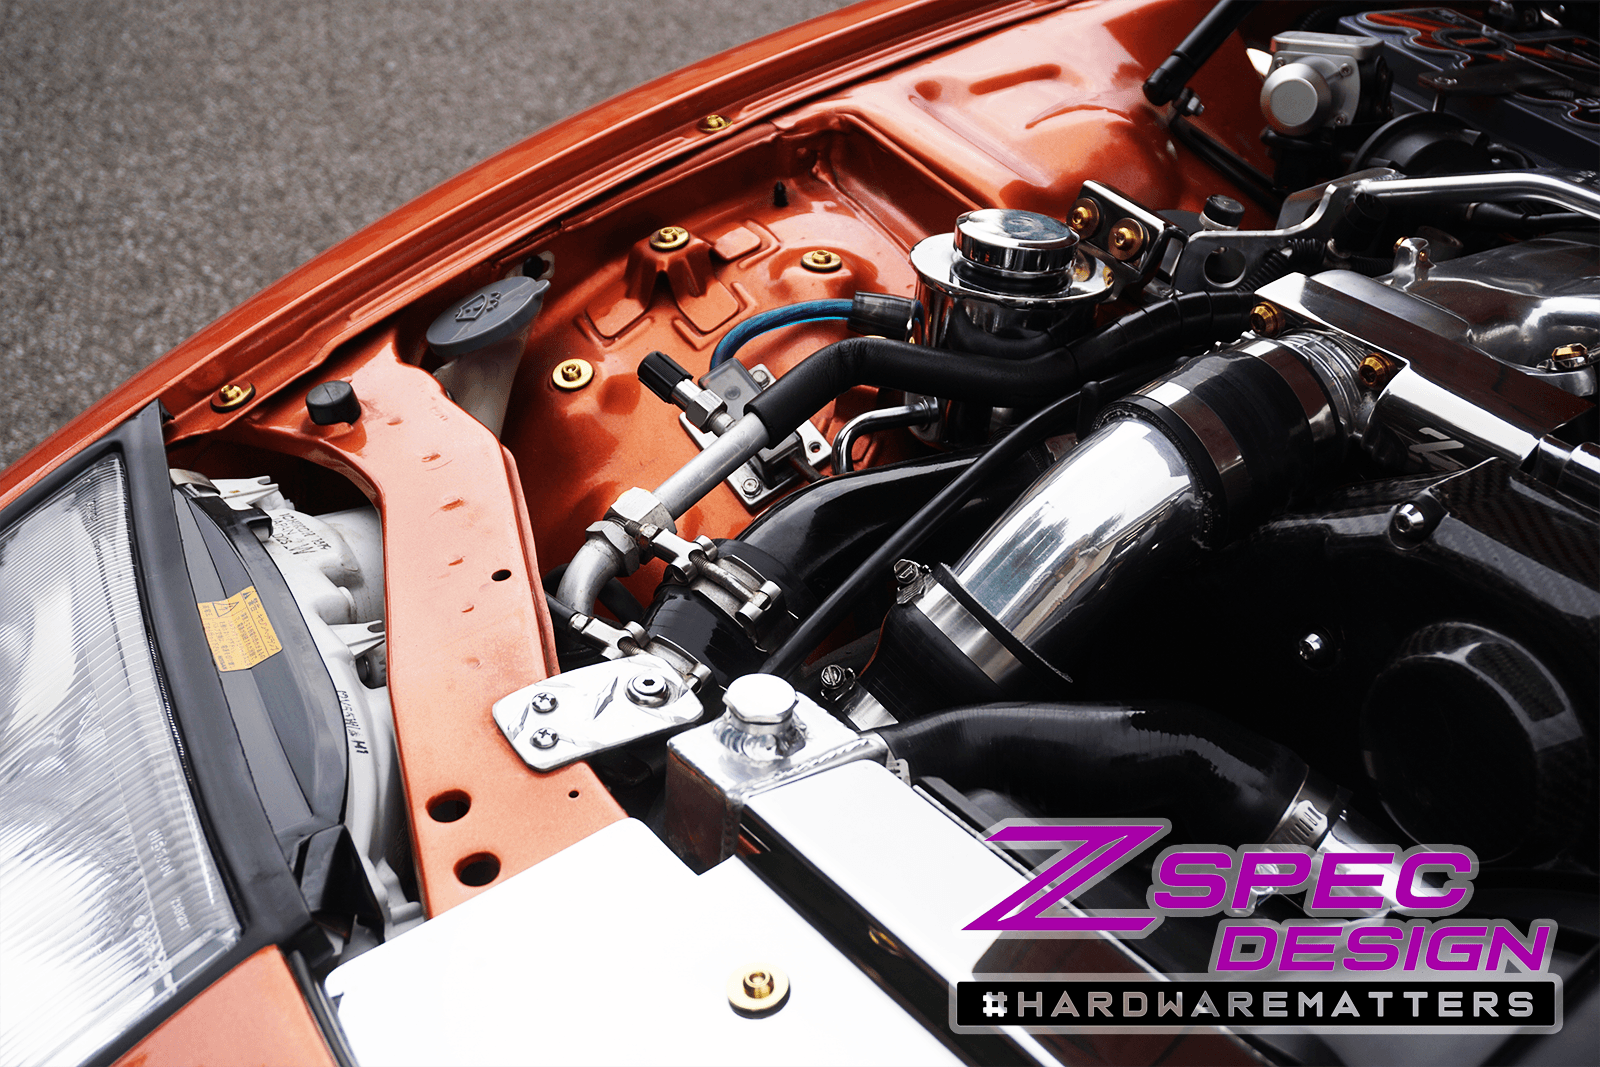 "Stage 1" Titanium Dress-Up Bolts(TM) Kit for Nissan 300zx Z32 by ZSPEC Grade5 GR5 Burned Black Red Blue Silver Gold Purple NISMO